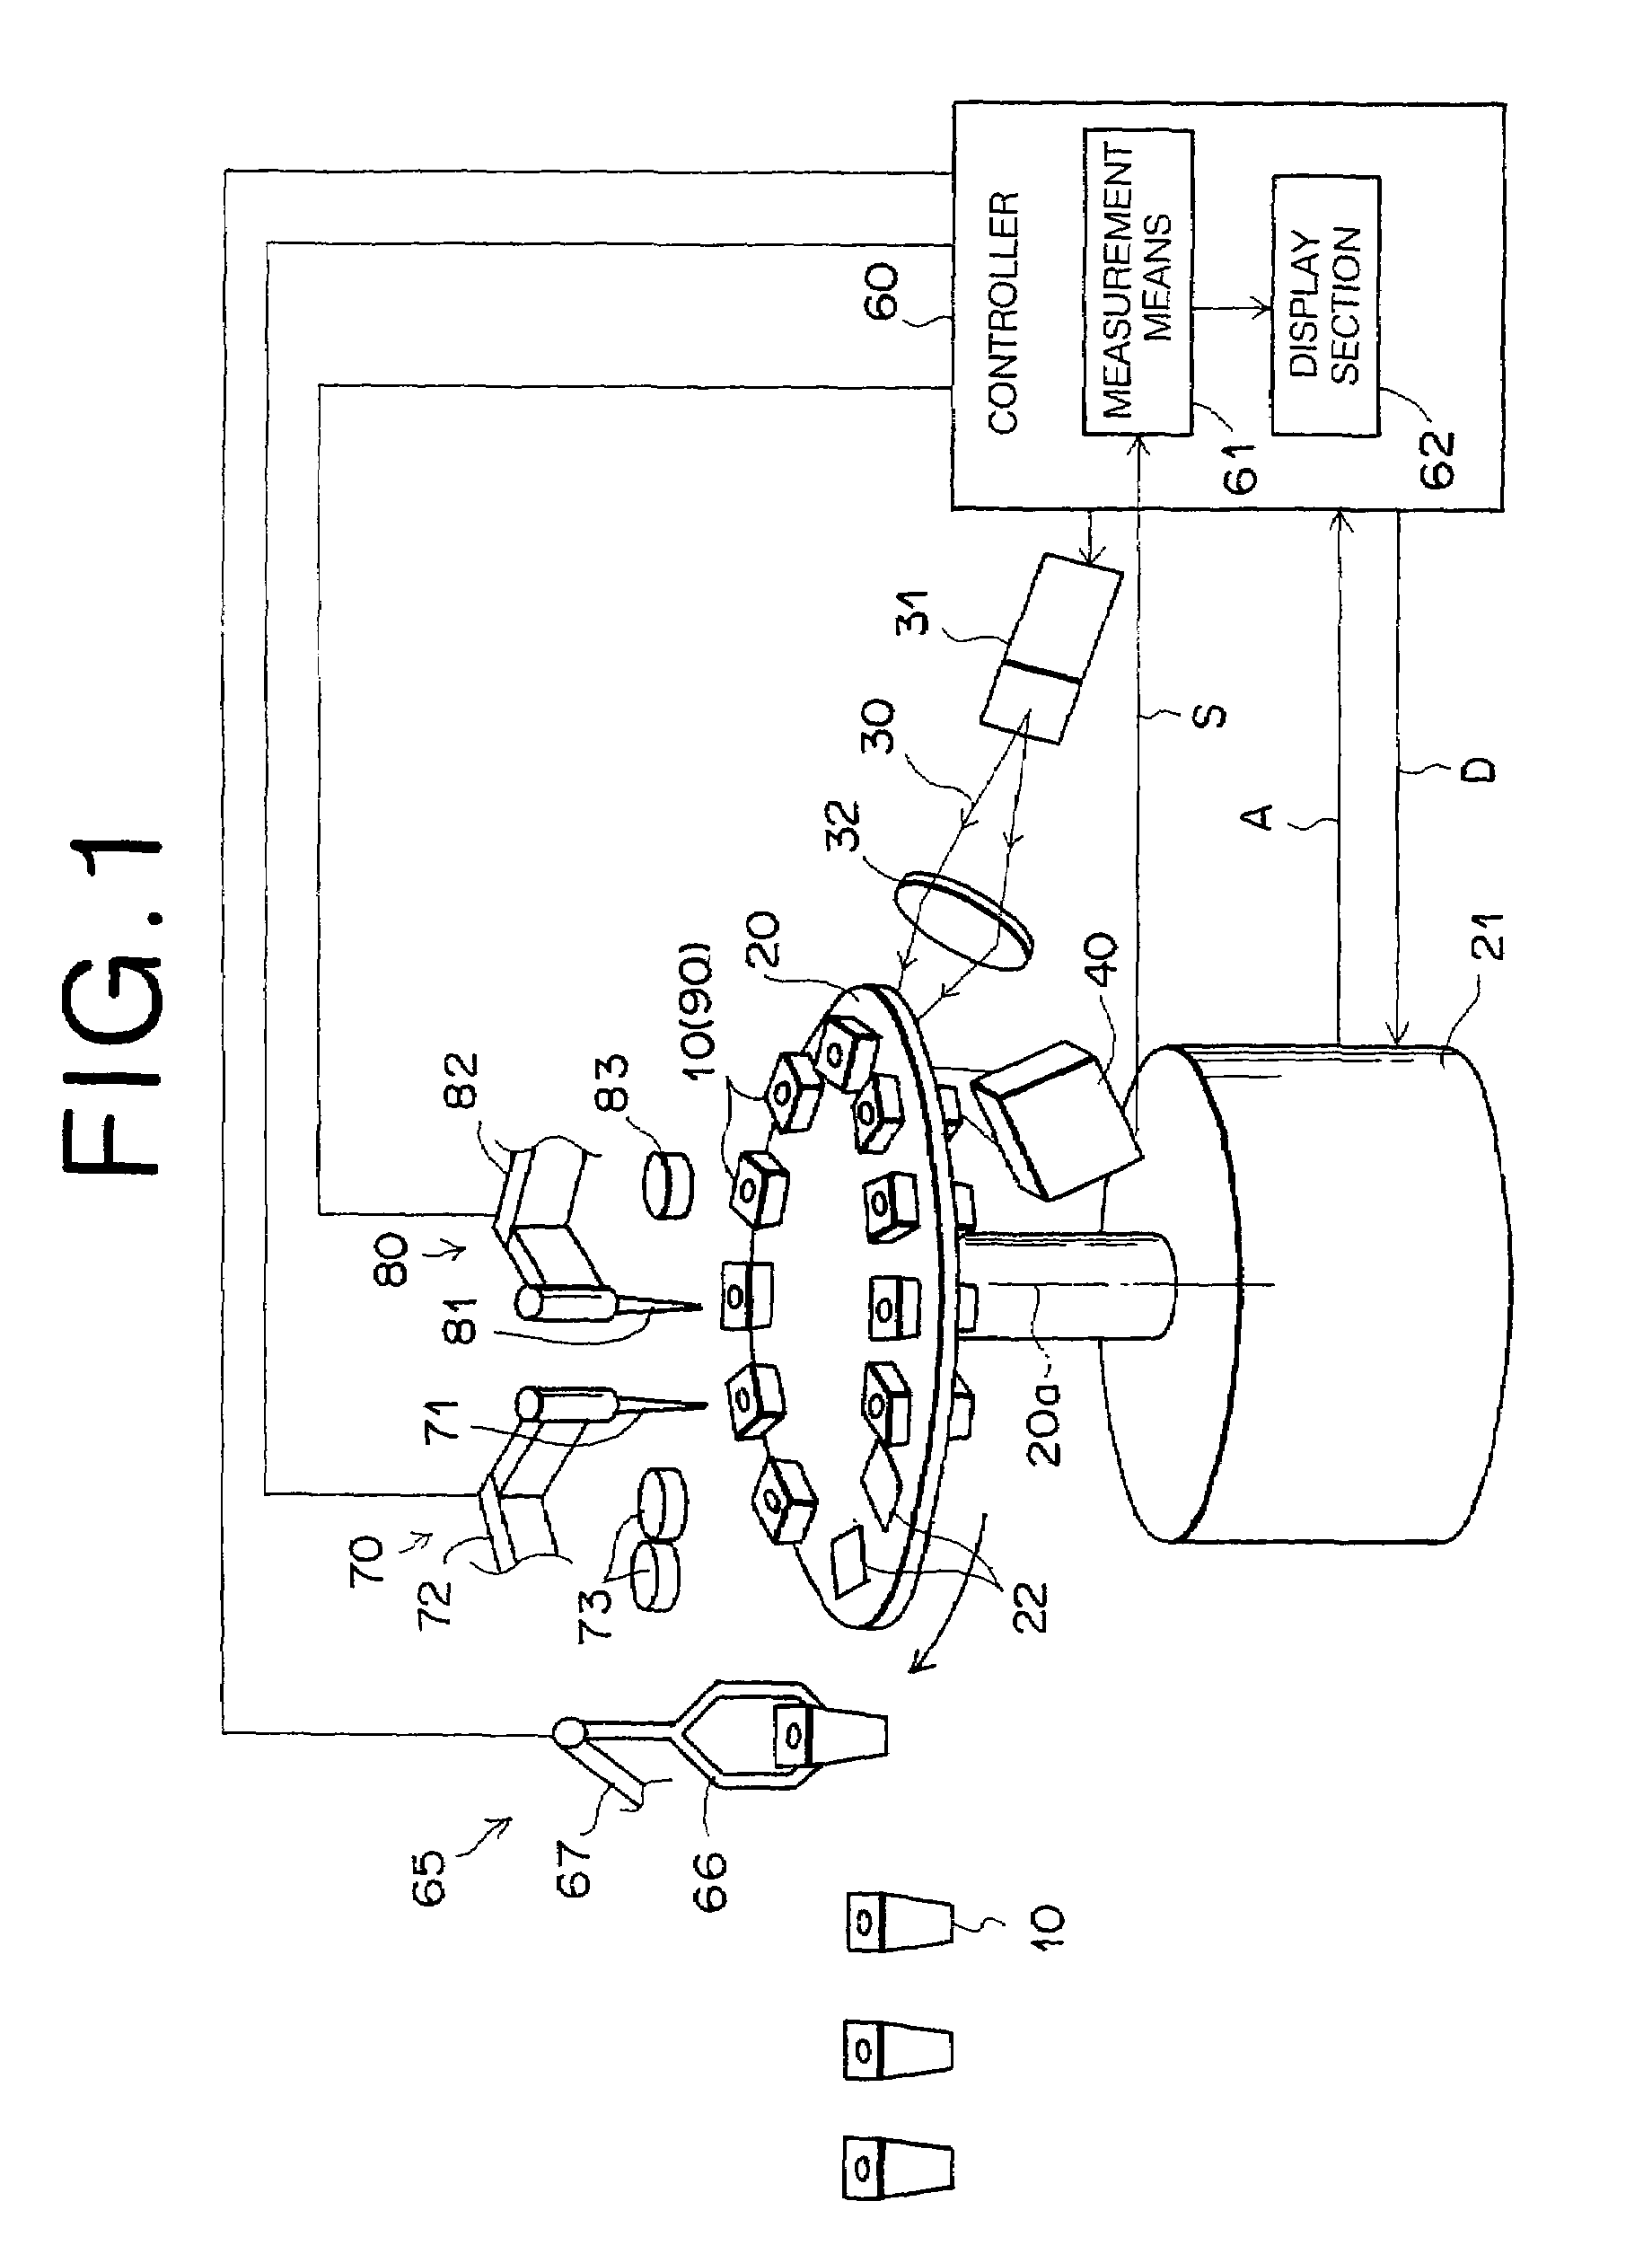 Measuring sensor utilizing attenuated total reflection and measuring chip assembly